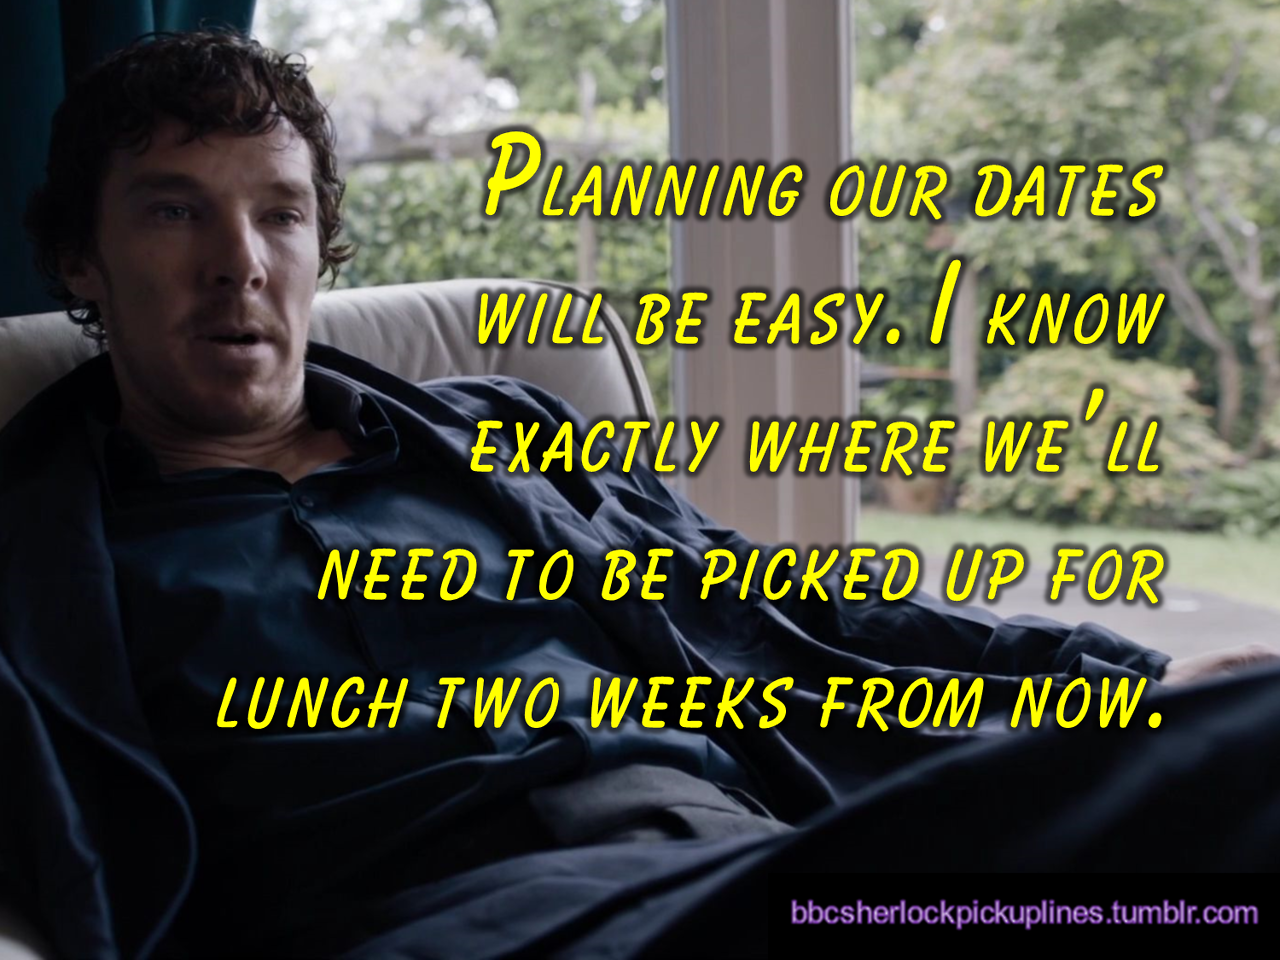 “Planning our dates will be easy. I know exactly where we’ll need to be picked